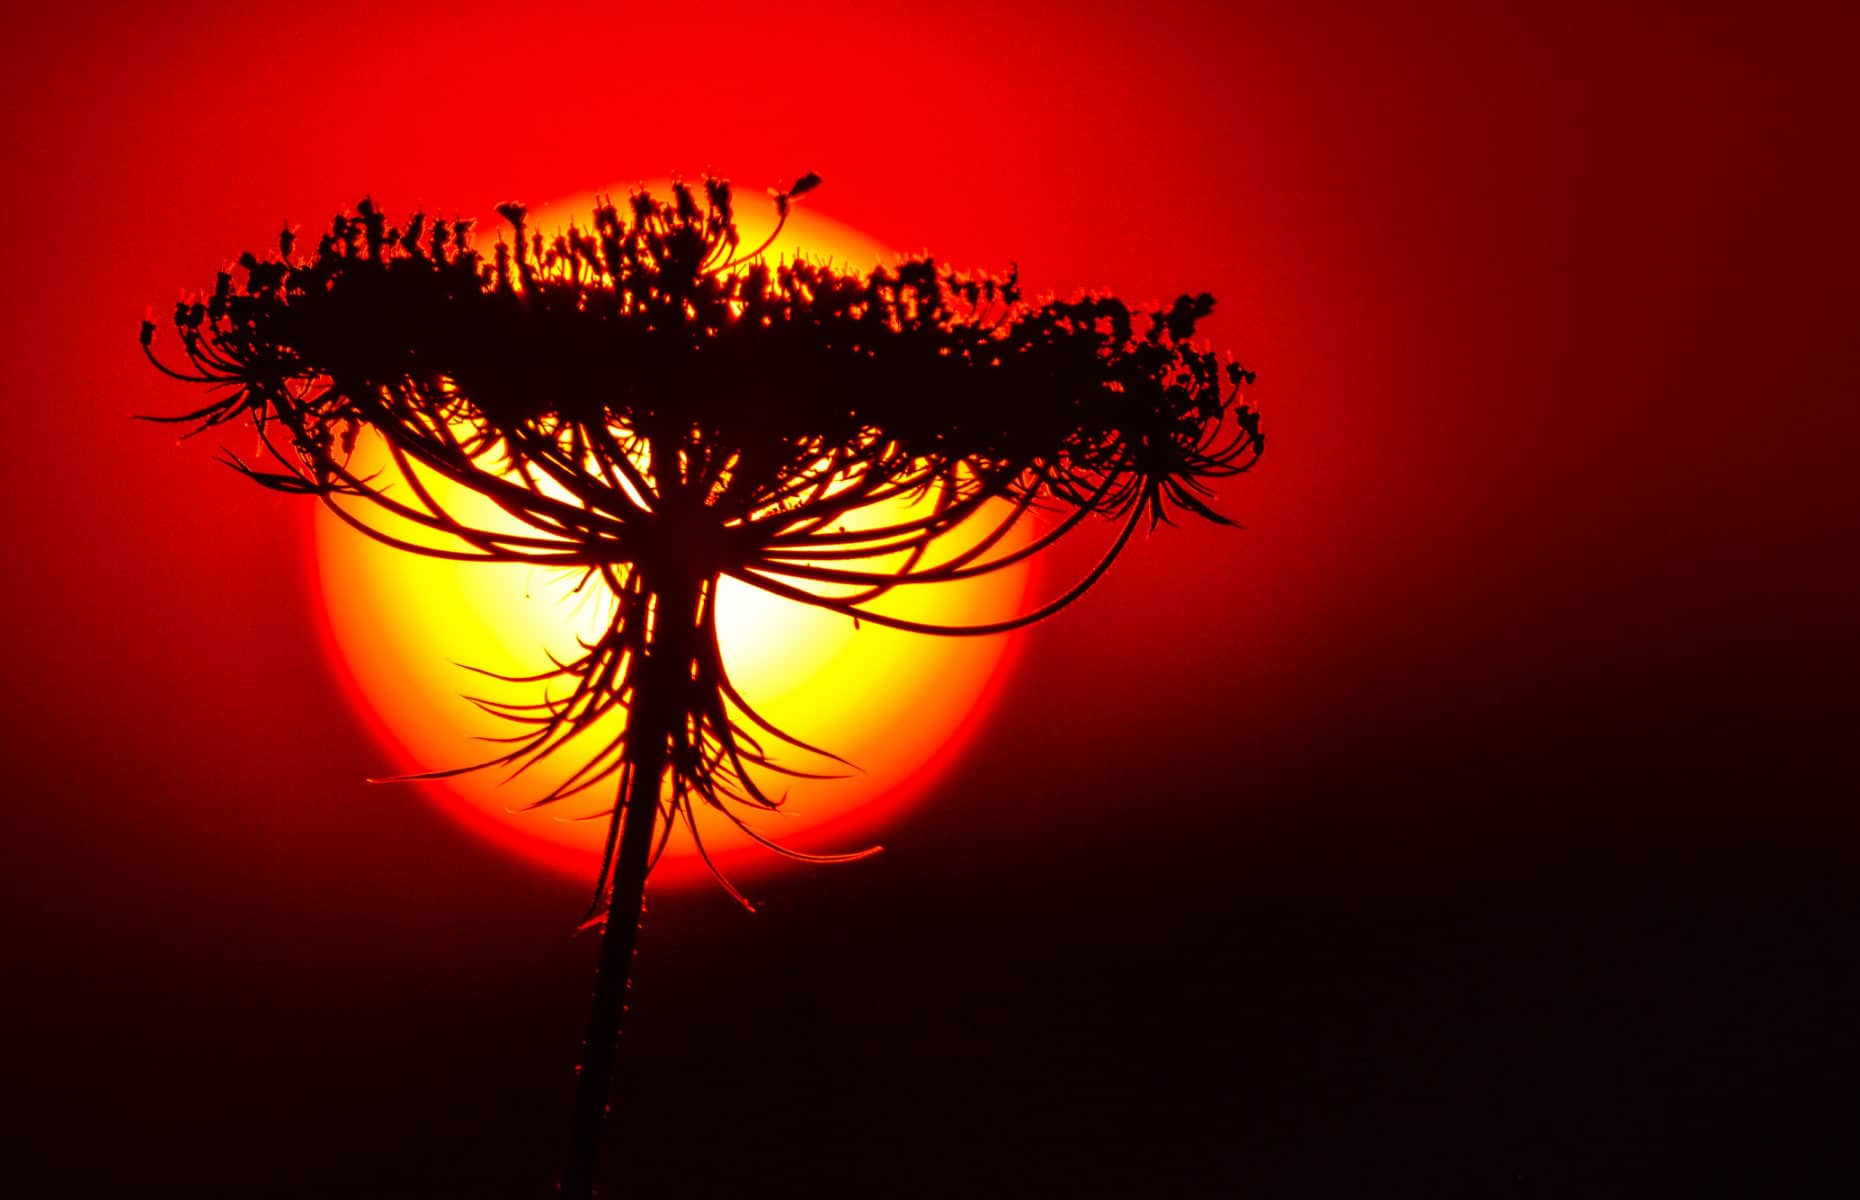 silhouette of flower with sunset